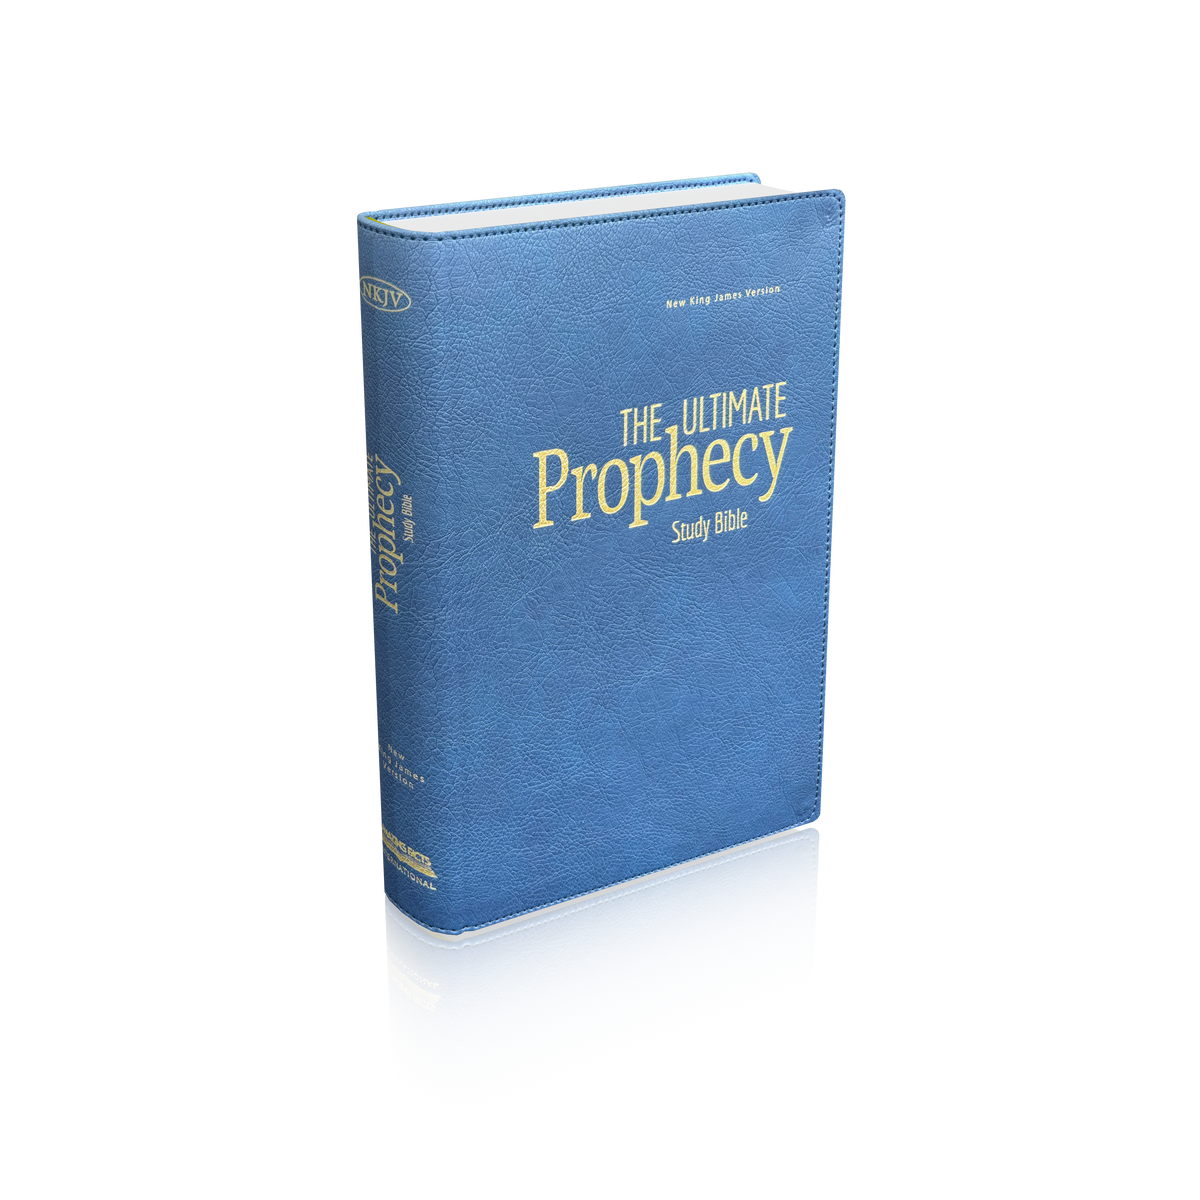 Pre-Order Now! The Ultimate Prophecy Study Bible - Blue Leathersoft by Amazing Facts